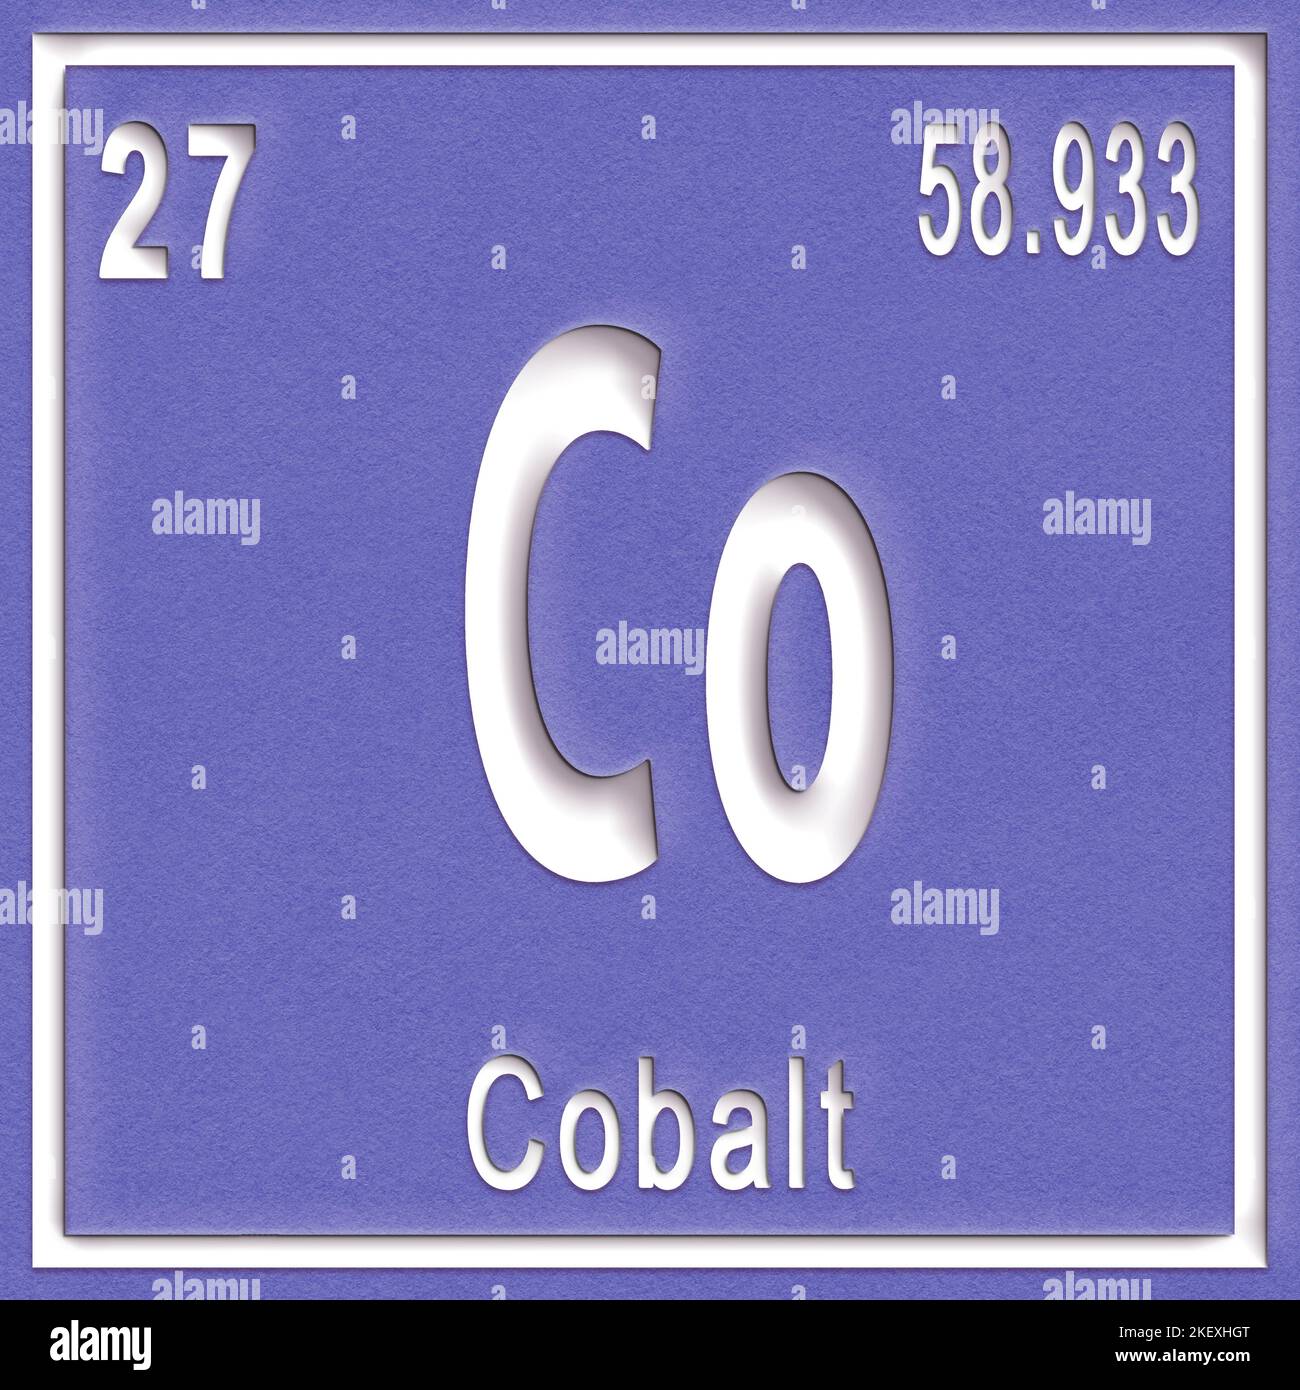 Cobalt chemical element, Sign with atomic number and atomic weight, Periodic Table Element Stock Photo